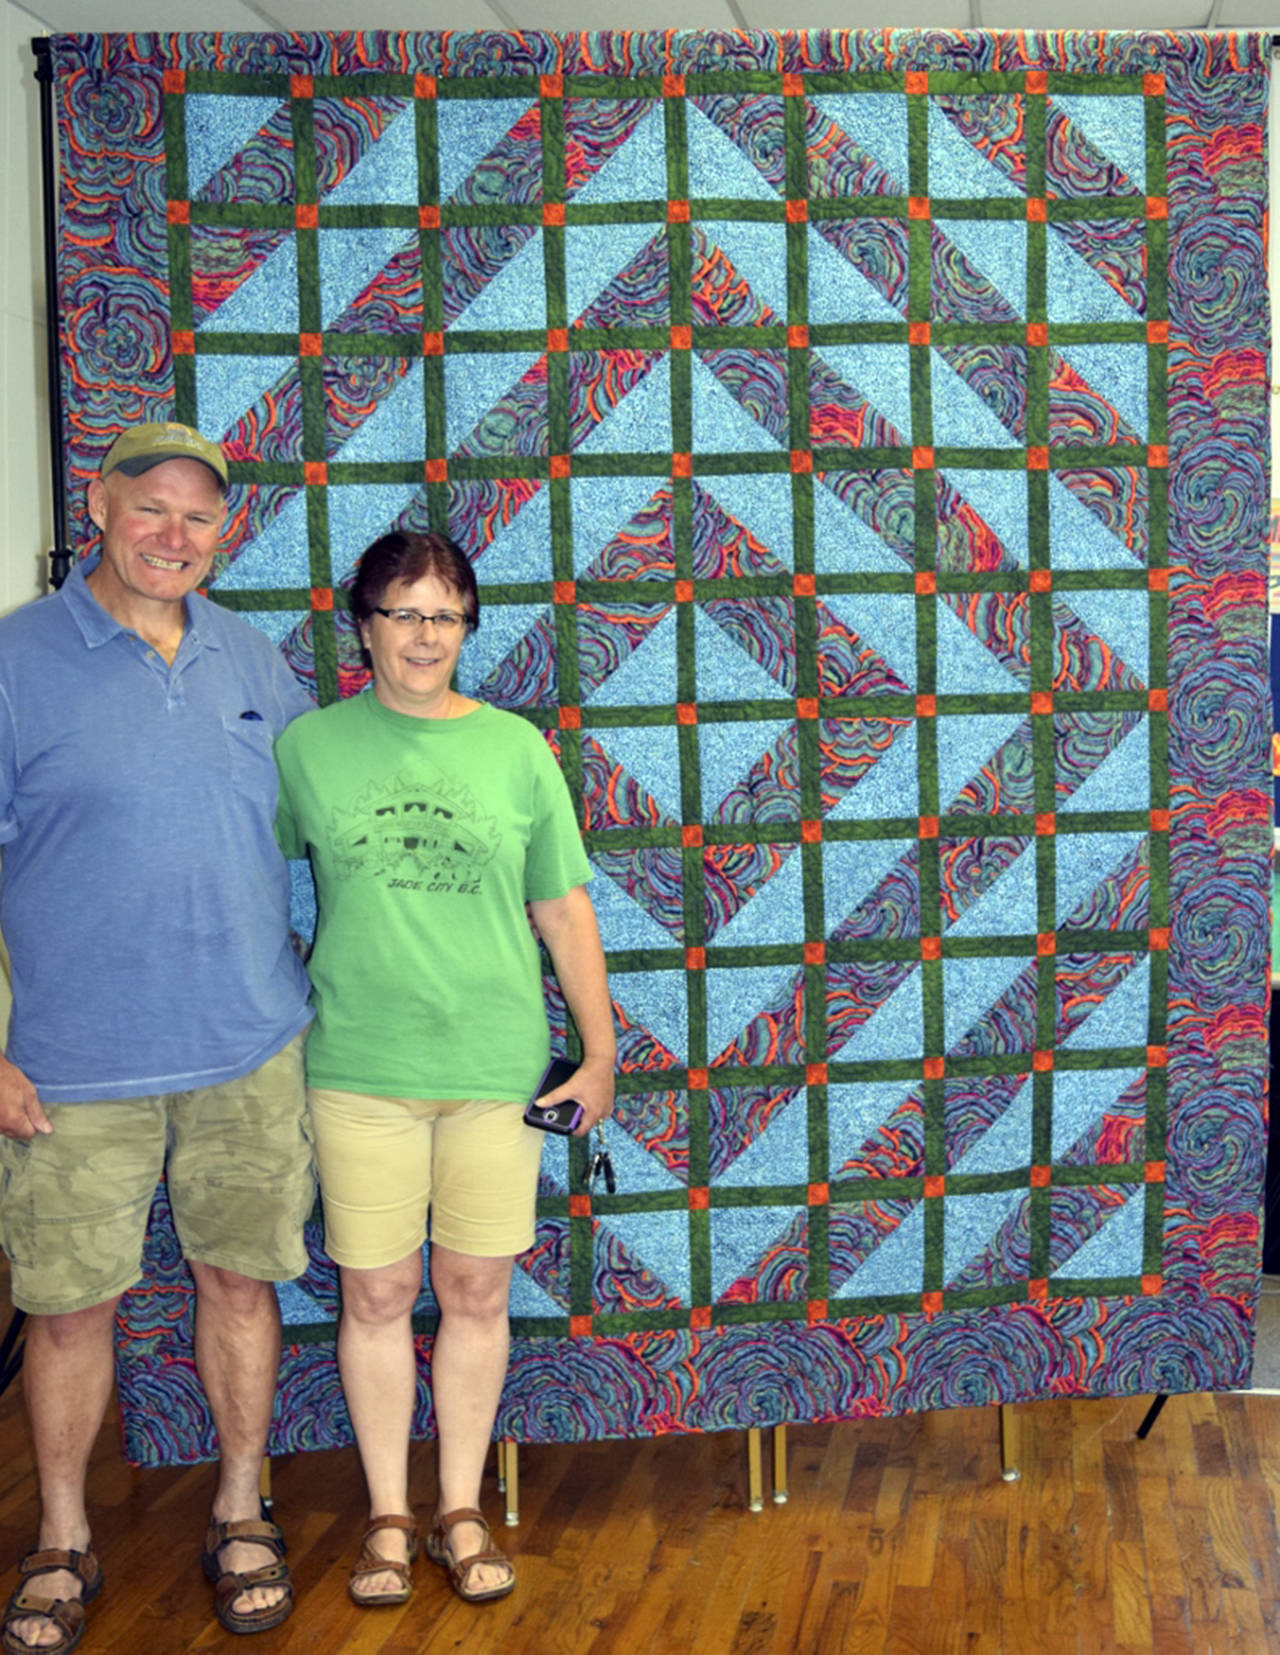 Vivian Edersheim                                Christine Obermiller of Aberdeen (pictured with her husband, Chris Culbertson) won the raffle quilt at the 2019 Pacific County Fair.